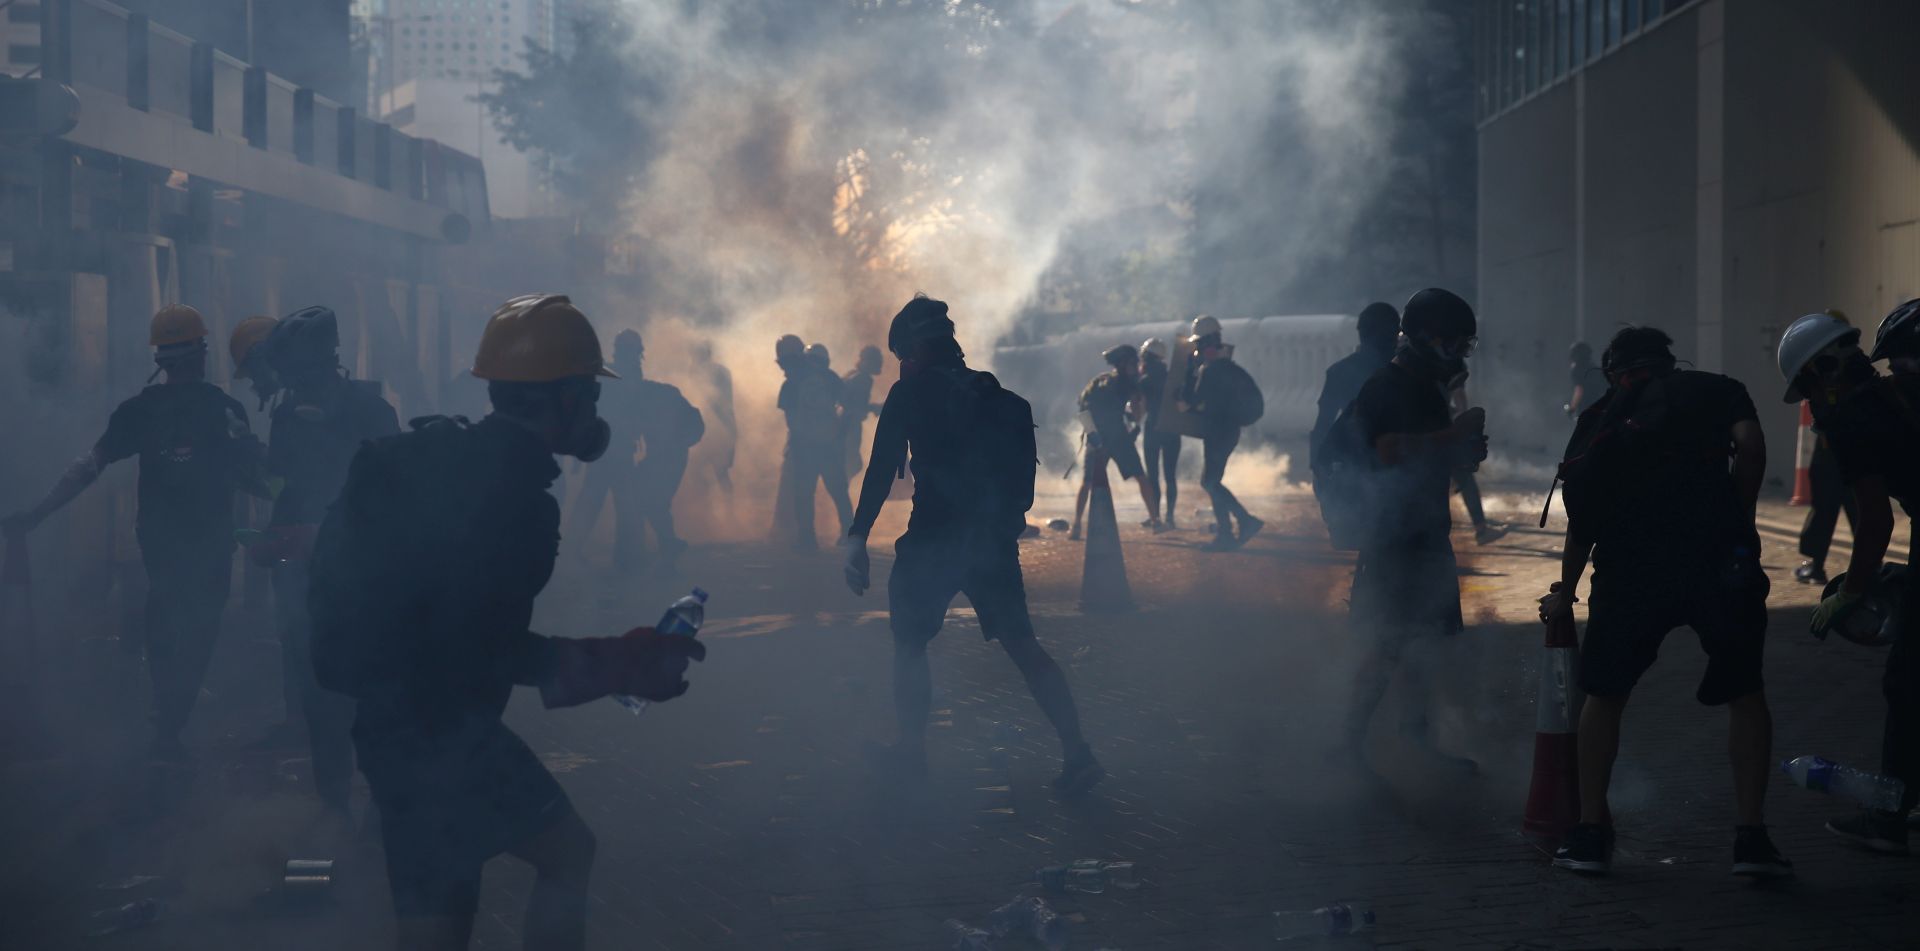 epa07757605 Anti-extradition protesters react after police fired tear gas at them in the Admiralty area of Hong Kong, China, 05 August 2019. Hong Kong is in the midst of a day of citywide strike following a ninth consecutive weekend of multiple anti-extradition rallies and intense clashes between demonstrators and police over the now suspended extradition bill to China.  EPA/JEROME FAVRE